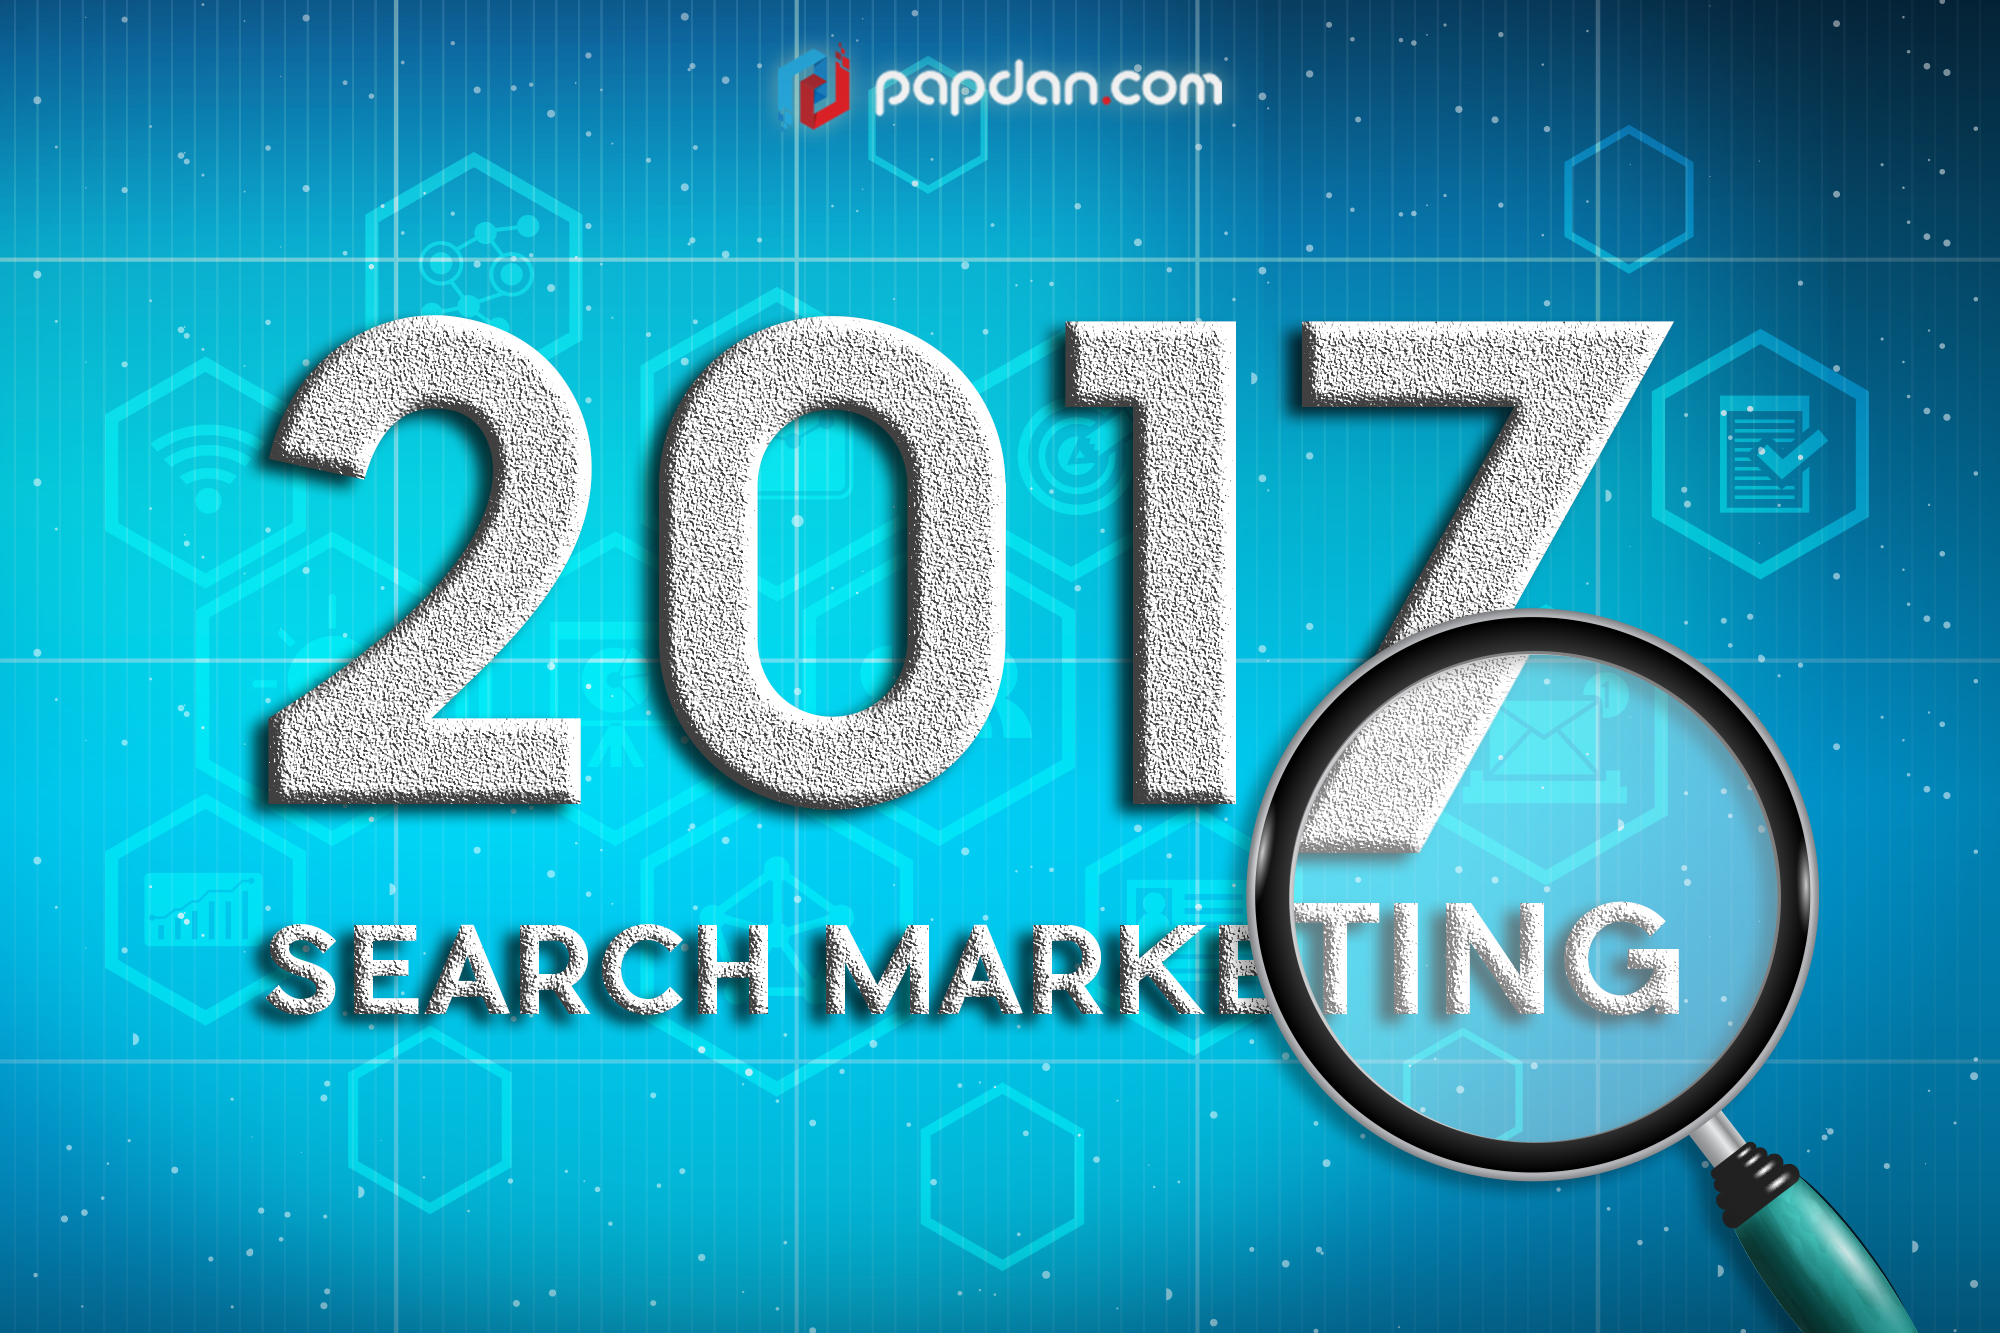 What to Expect for Search Marketing in 2017